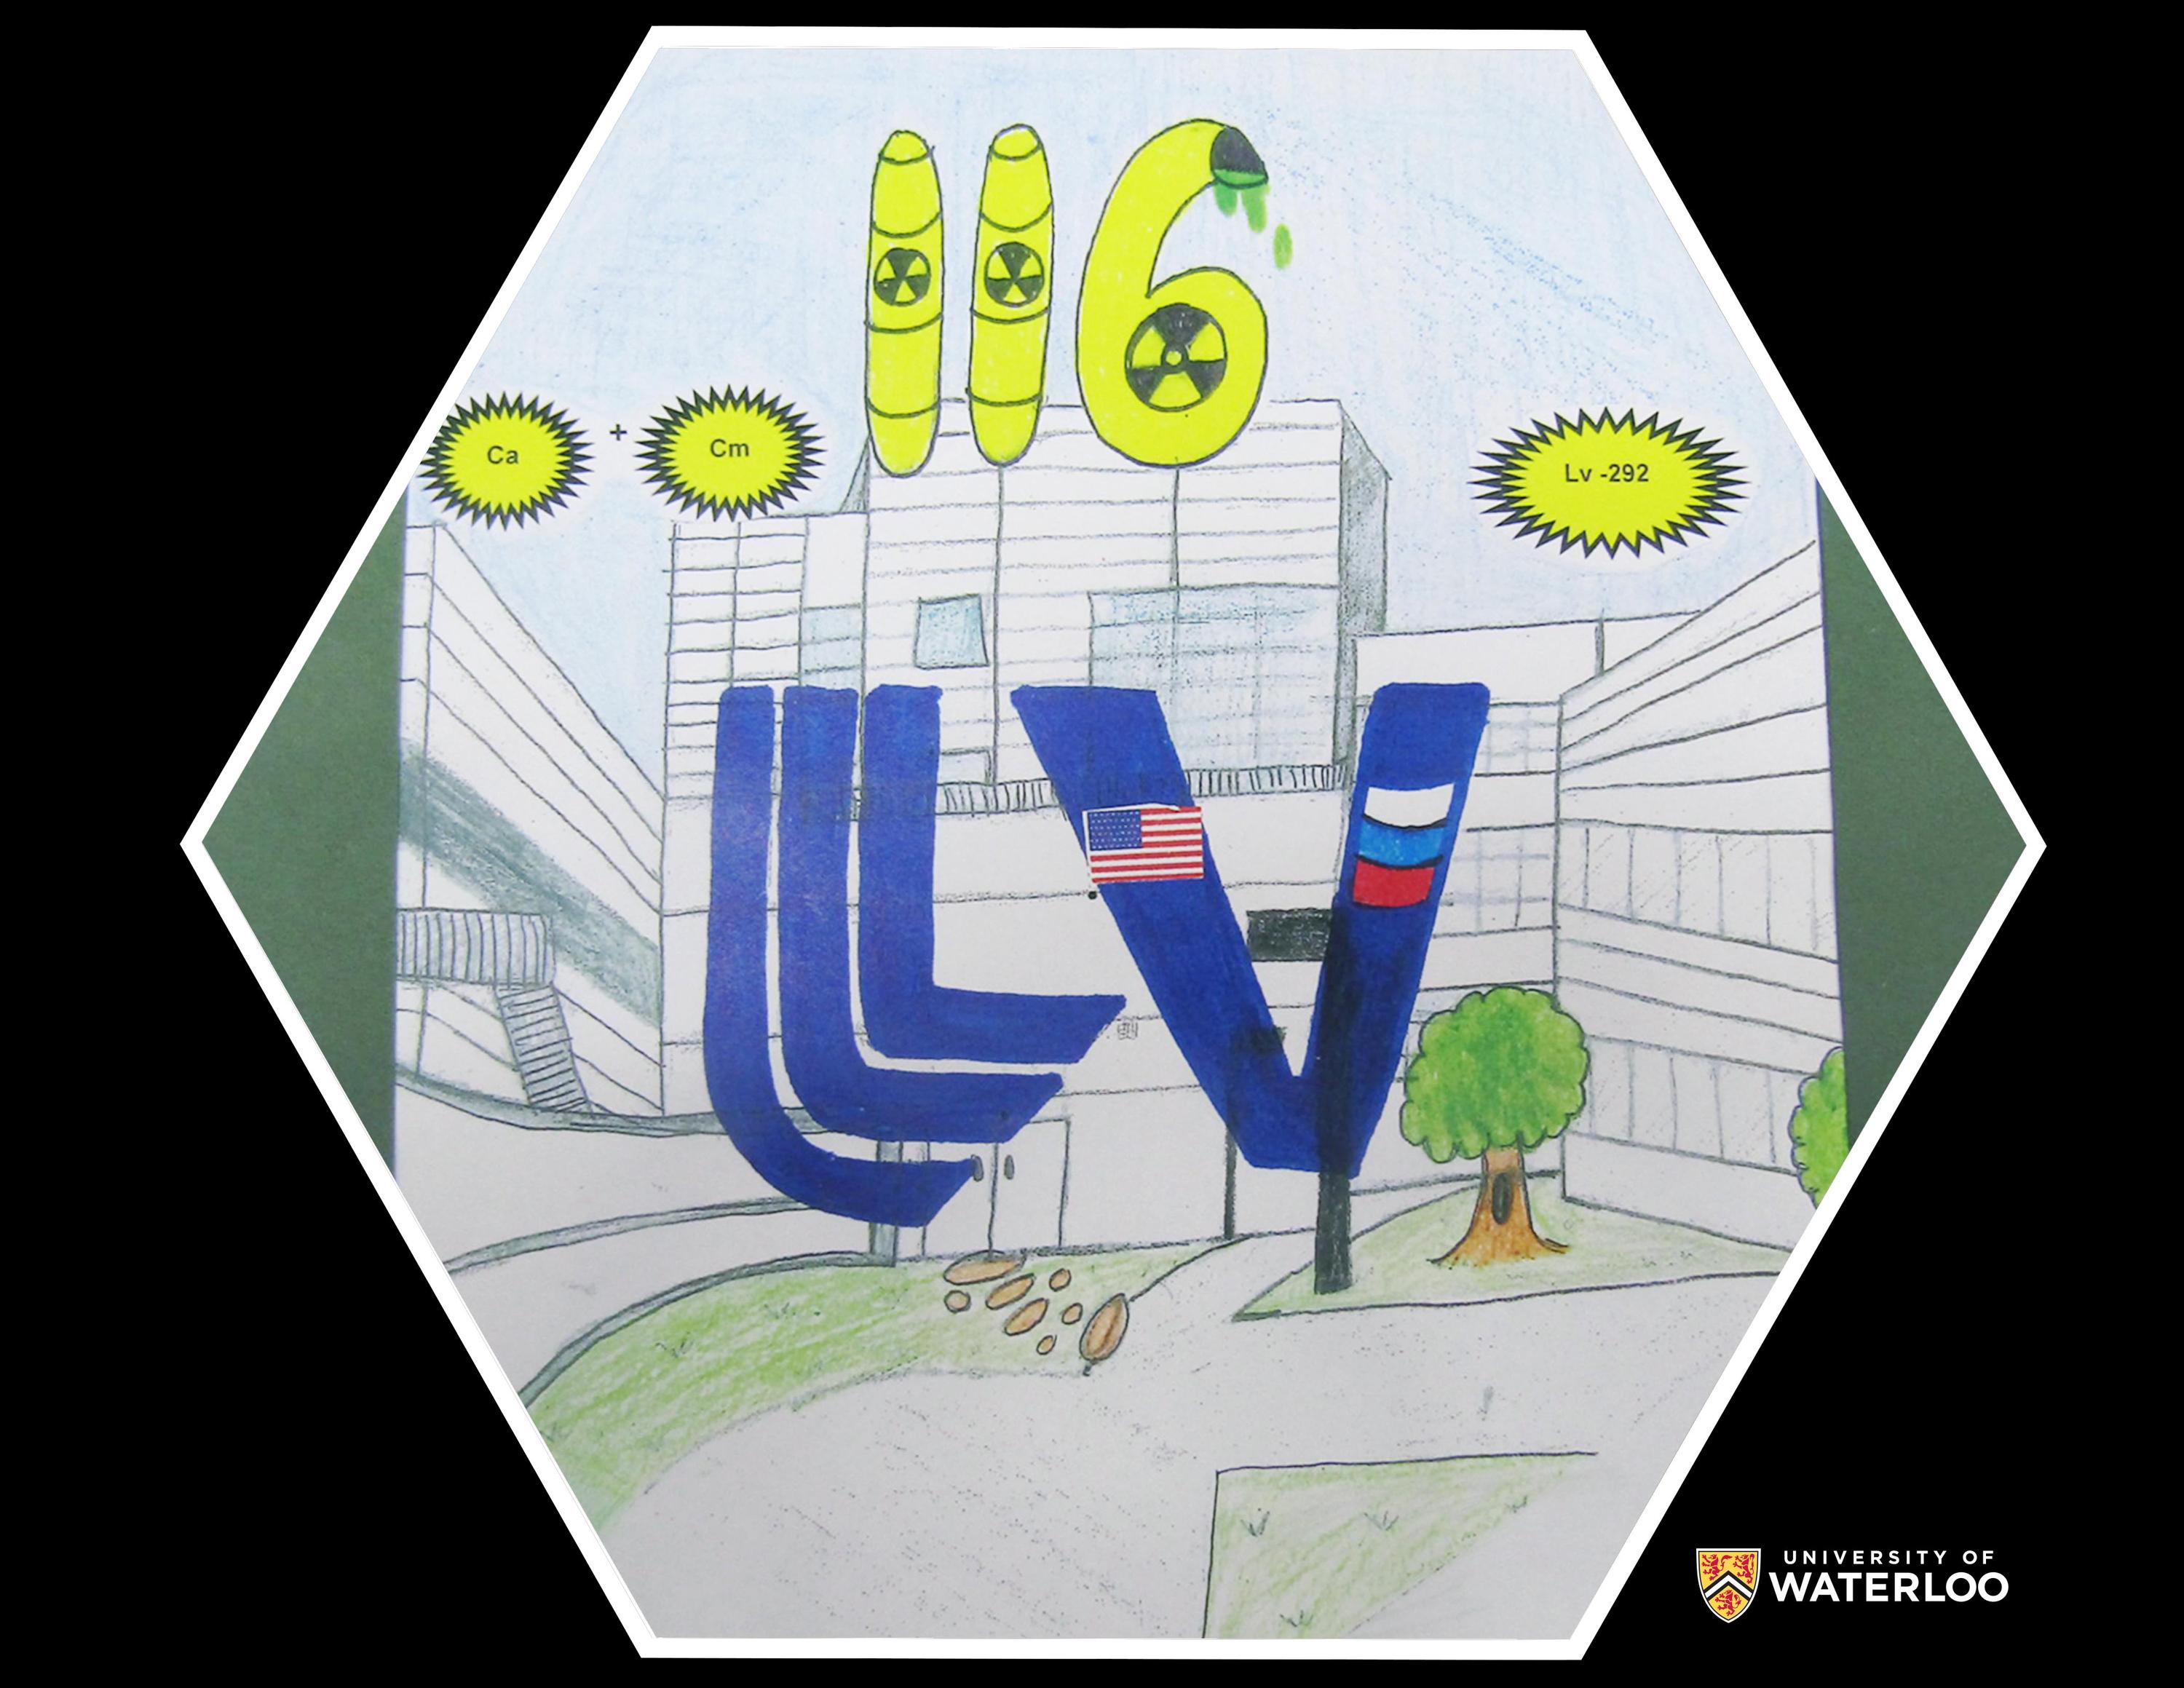 Coloured pencil on white paper. The chemical symbol “Lv” appears in bright blue, centre. The “L” is the logo for Lawrence Livermore Laboratory; within the V are the American and Russian flags. Above is atomic number “116” made with radioactive symbols. The isotopes Ca + Cm are shown at the top along with Lv-292. The background is a sketch of the Lawrence Livermore Laboratory.